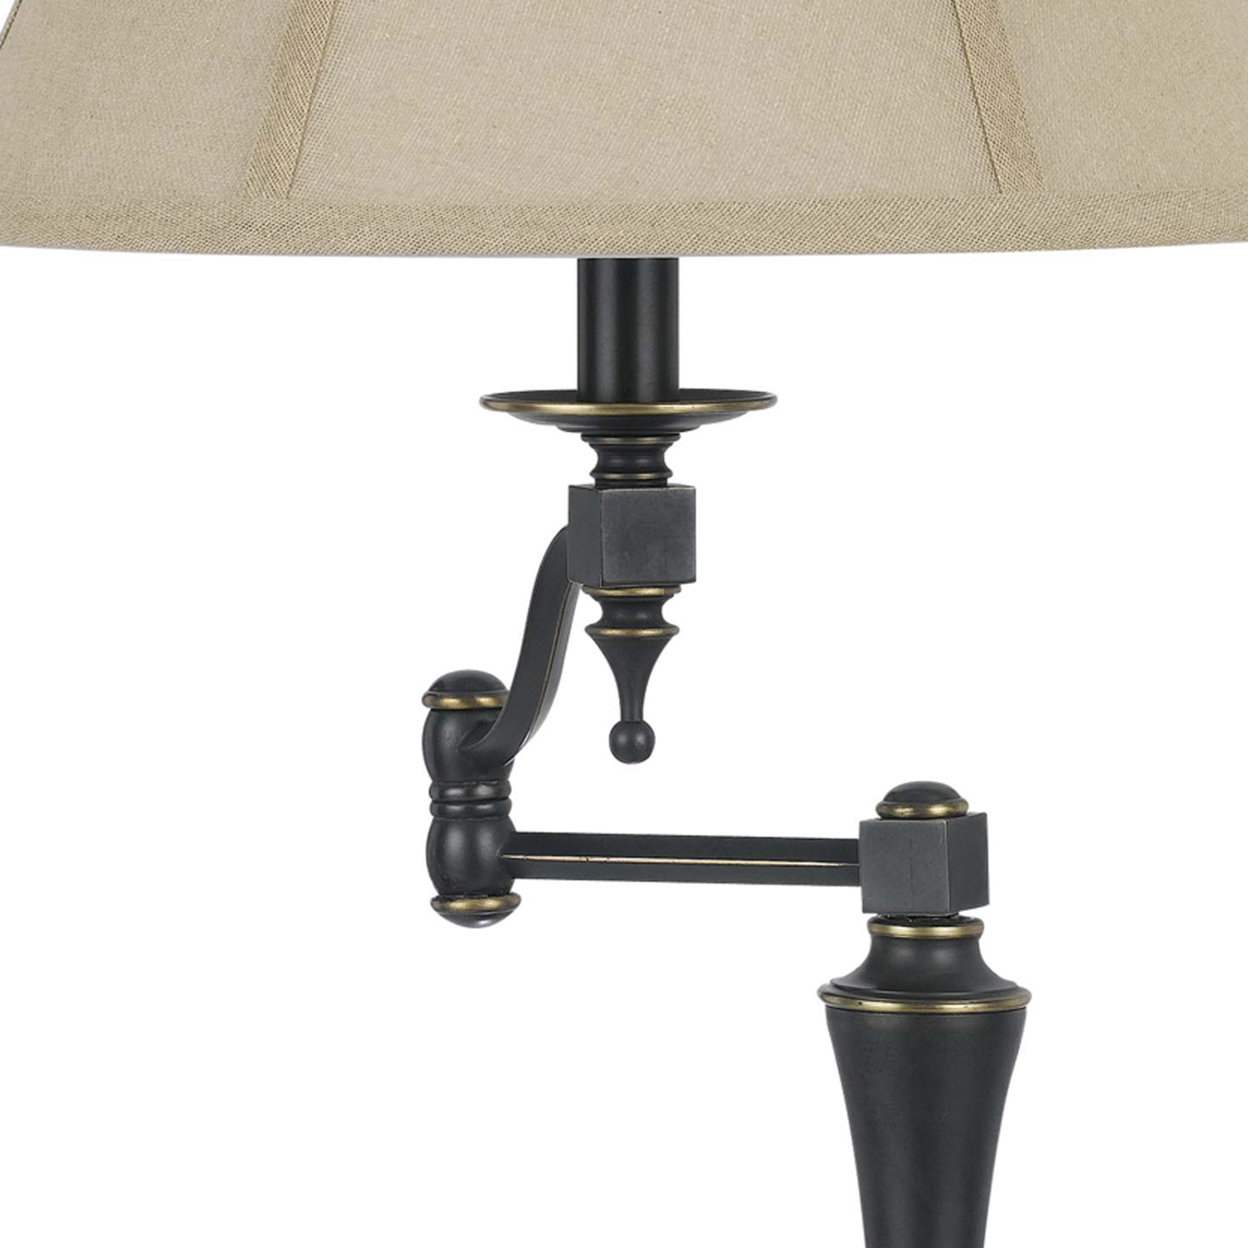 Metal Body Table Lamp With Fabric Tapered Bell Shade, Black And Beige- Saltoro Sherpi